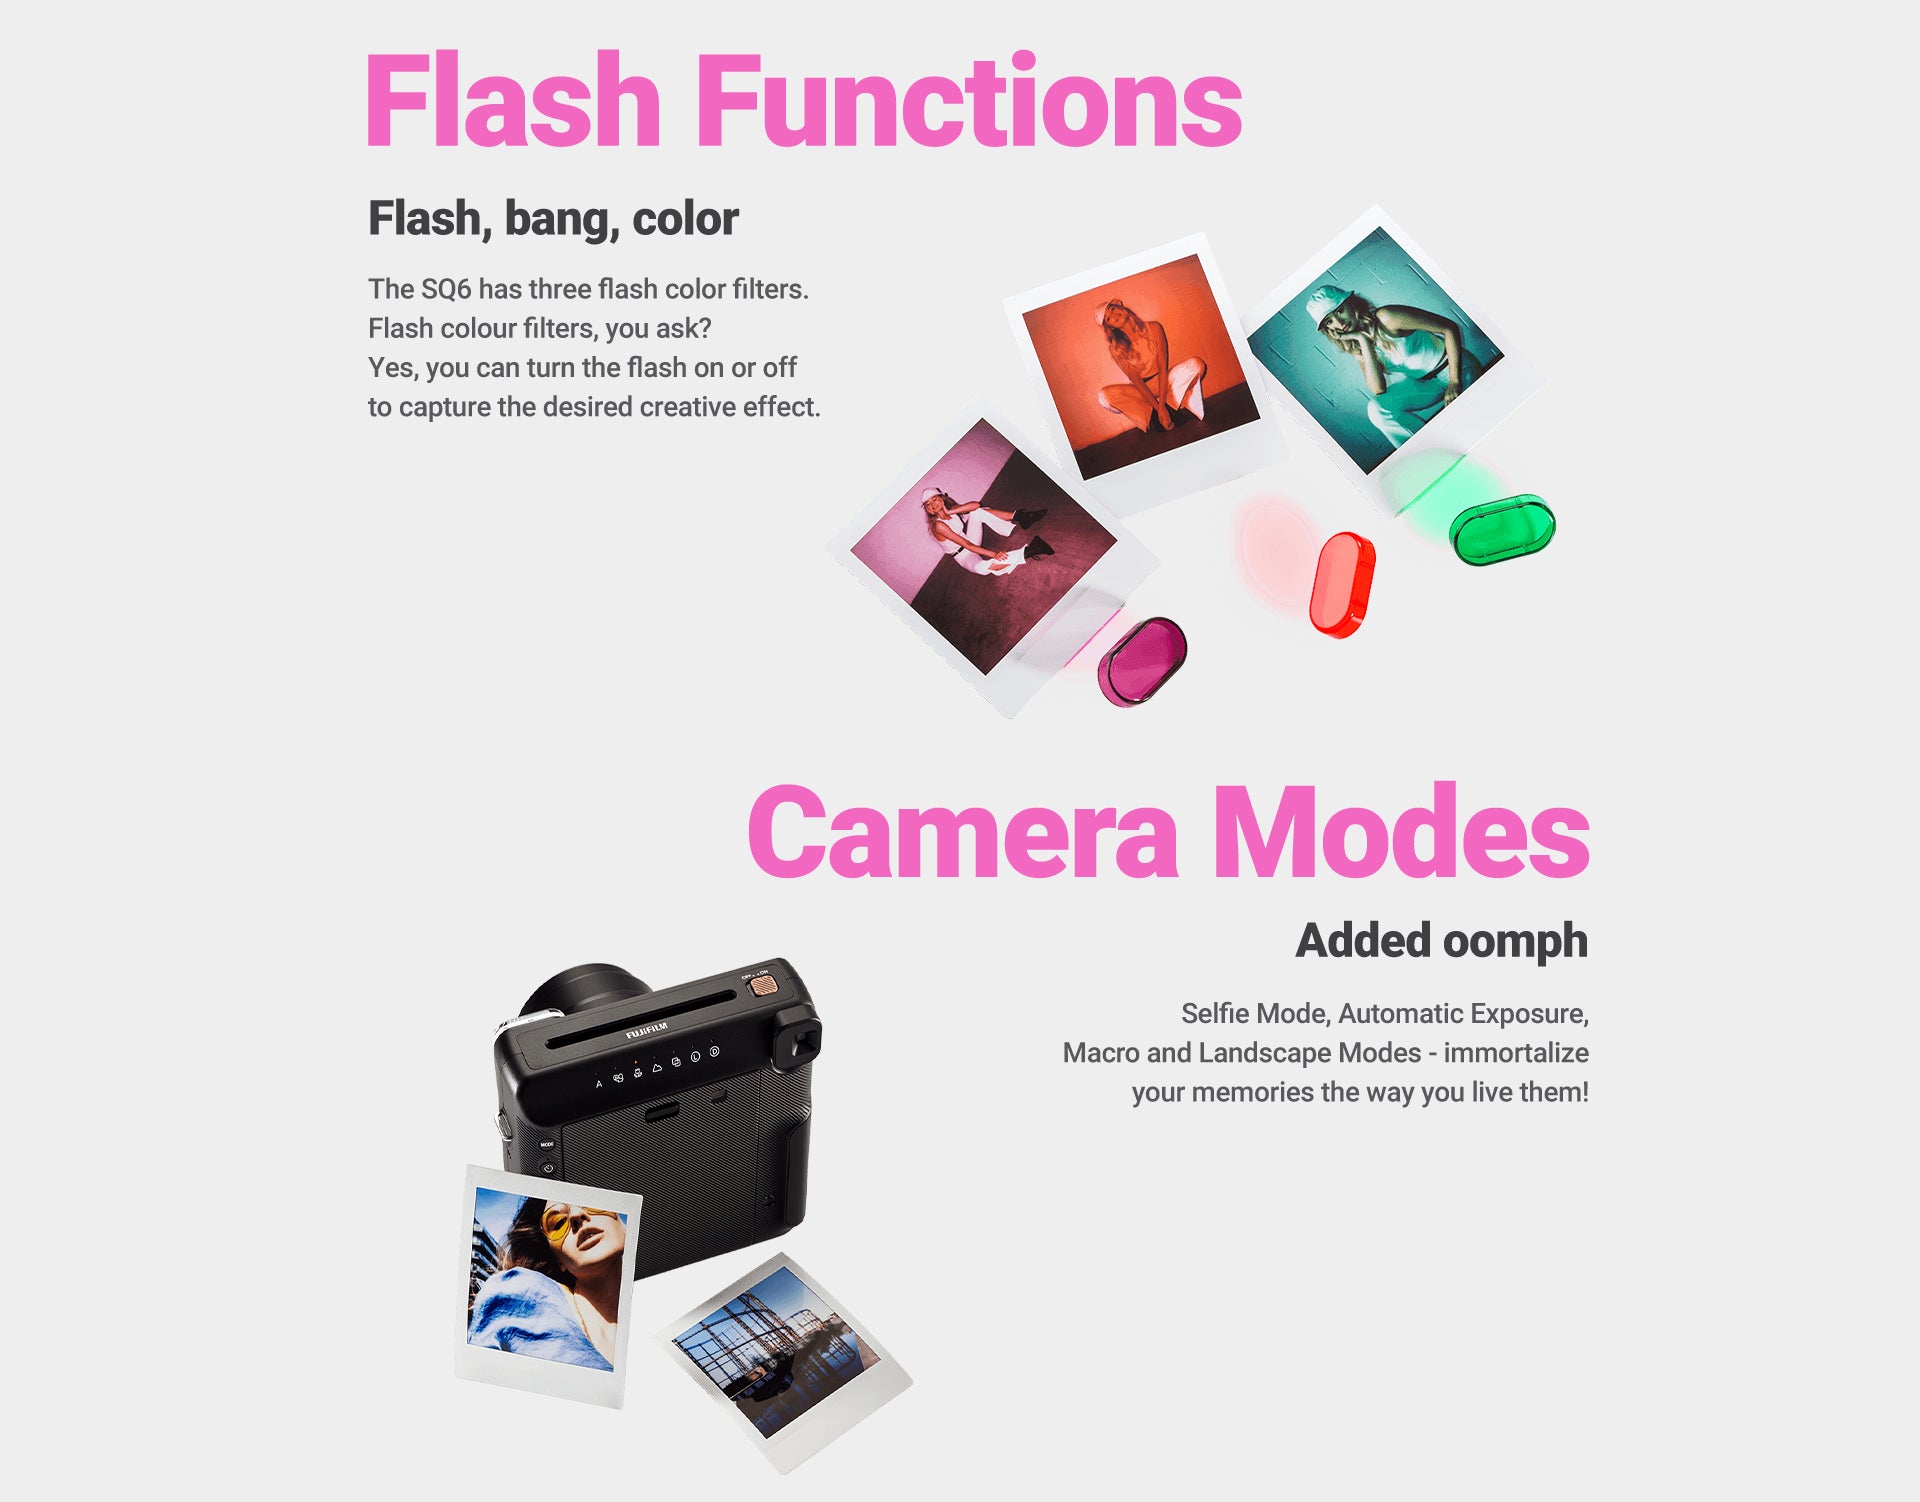 Flash Functions & Camera Modes - Instax Square SQ 6